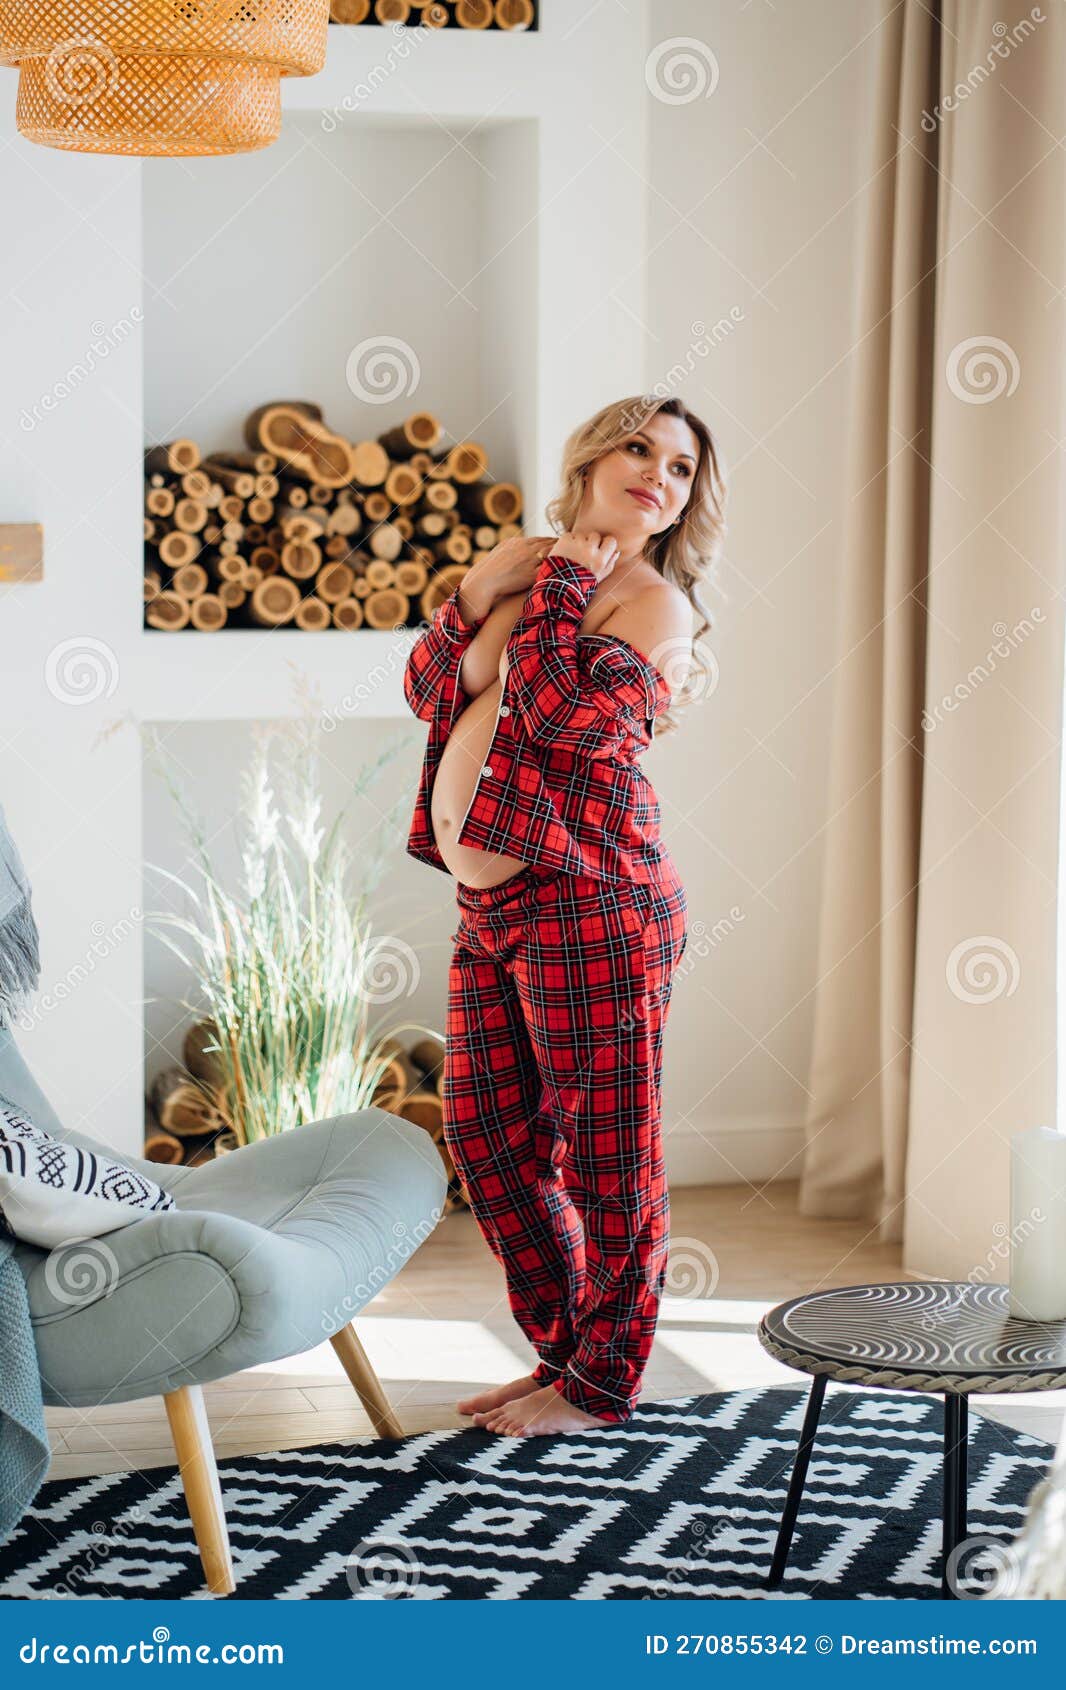 https://thumbs.dreamstime.com/z/pregnant-woman-topless-pajamas-home-interior-pregnant-woman-topless-pajamas-home-interior-beauty-270855342.jpg